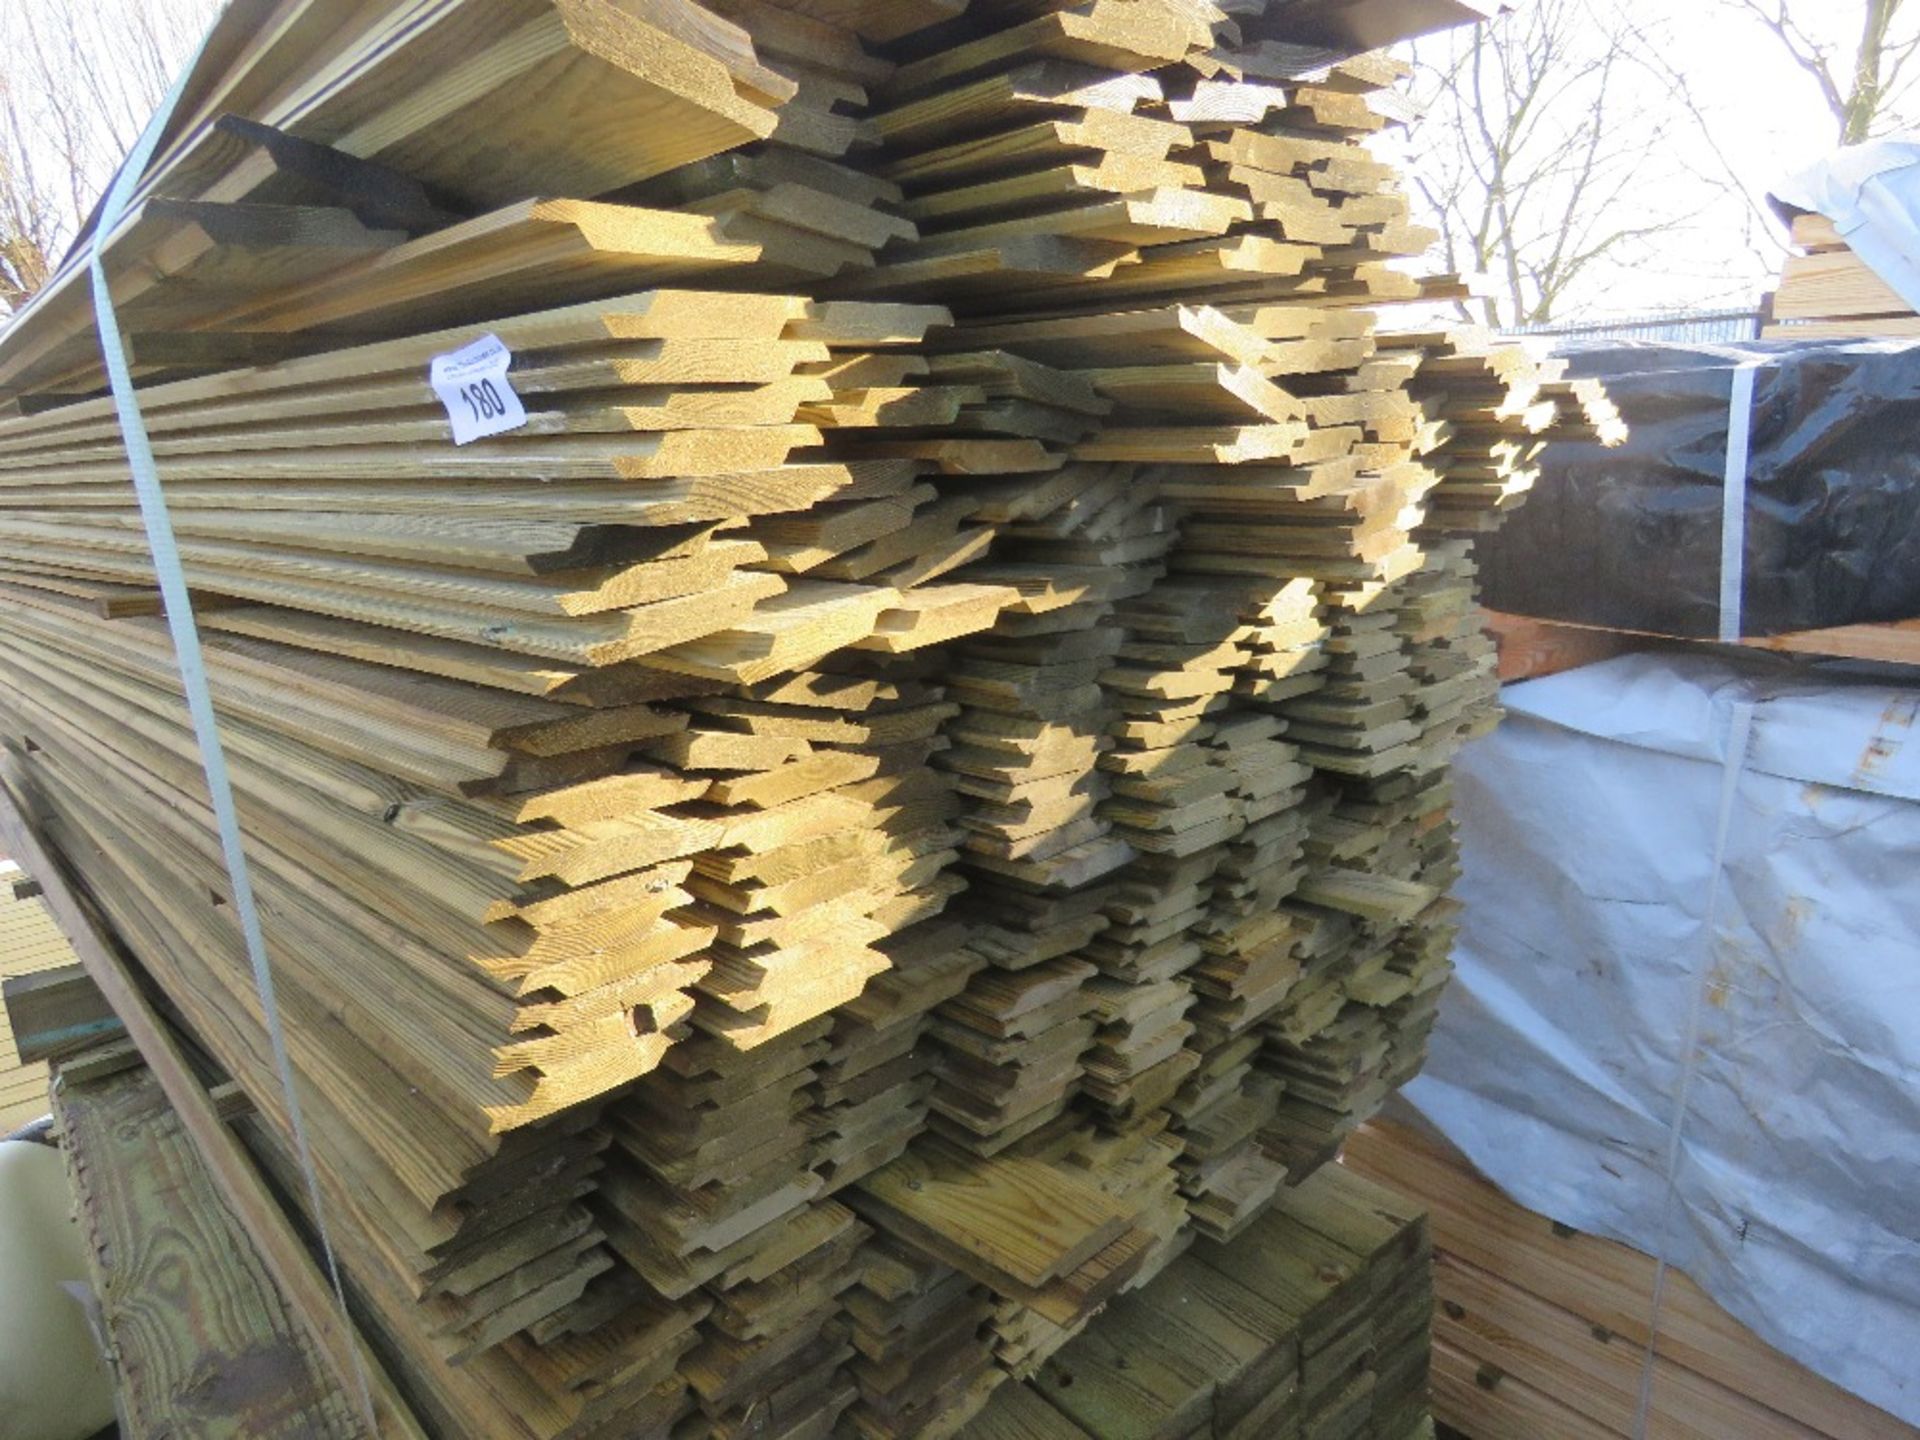 LARGE BUNDLE OF PRESSURE TREATED SHIPLAP TIMBER CLADDING: 1.7M LENGTH X 10CM WIDTH APPROX. - Image 2 of 3